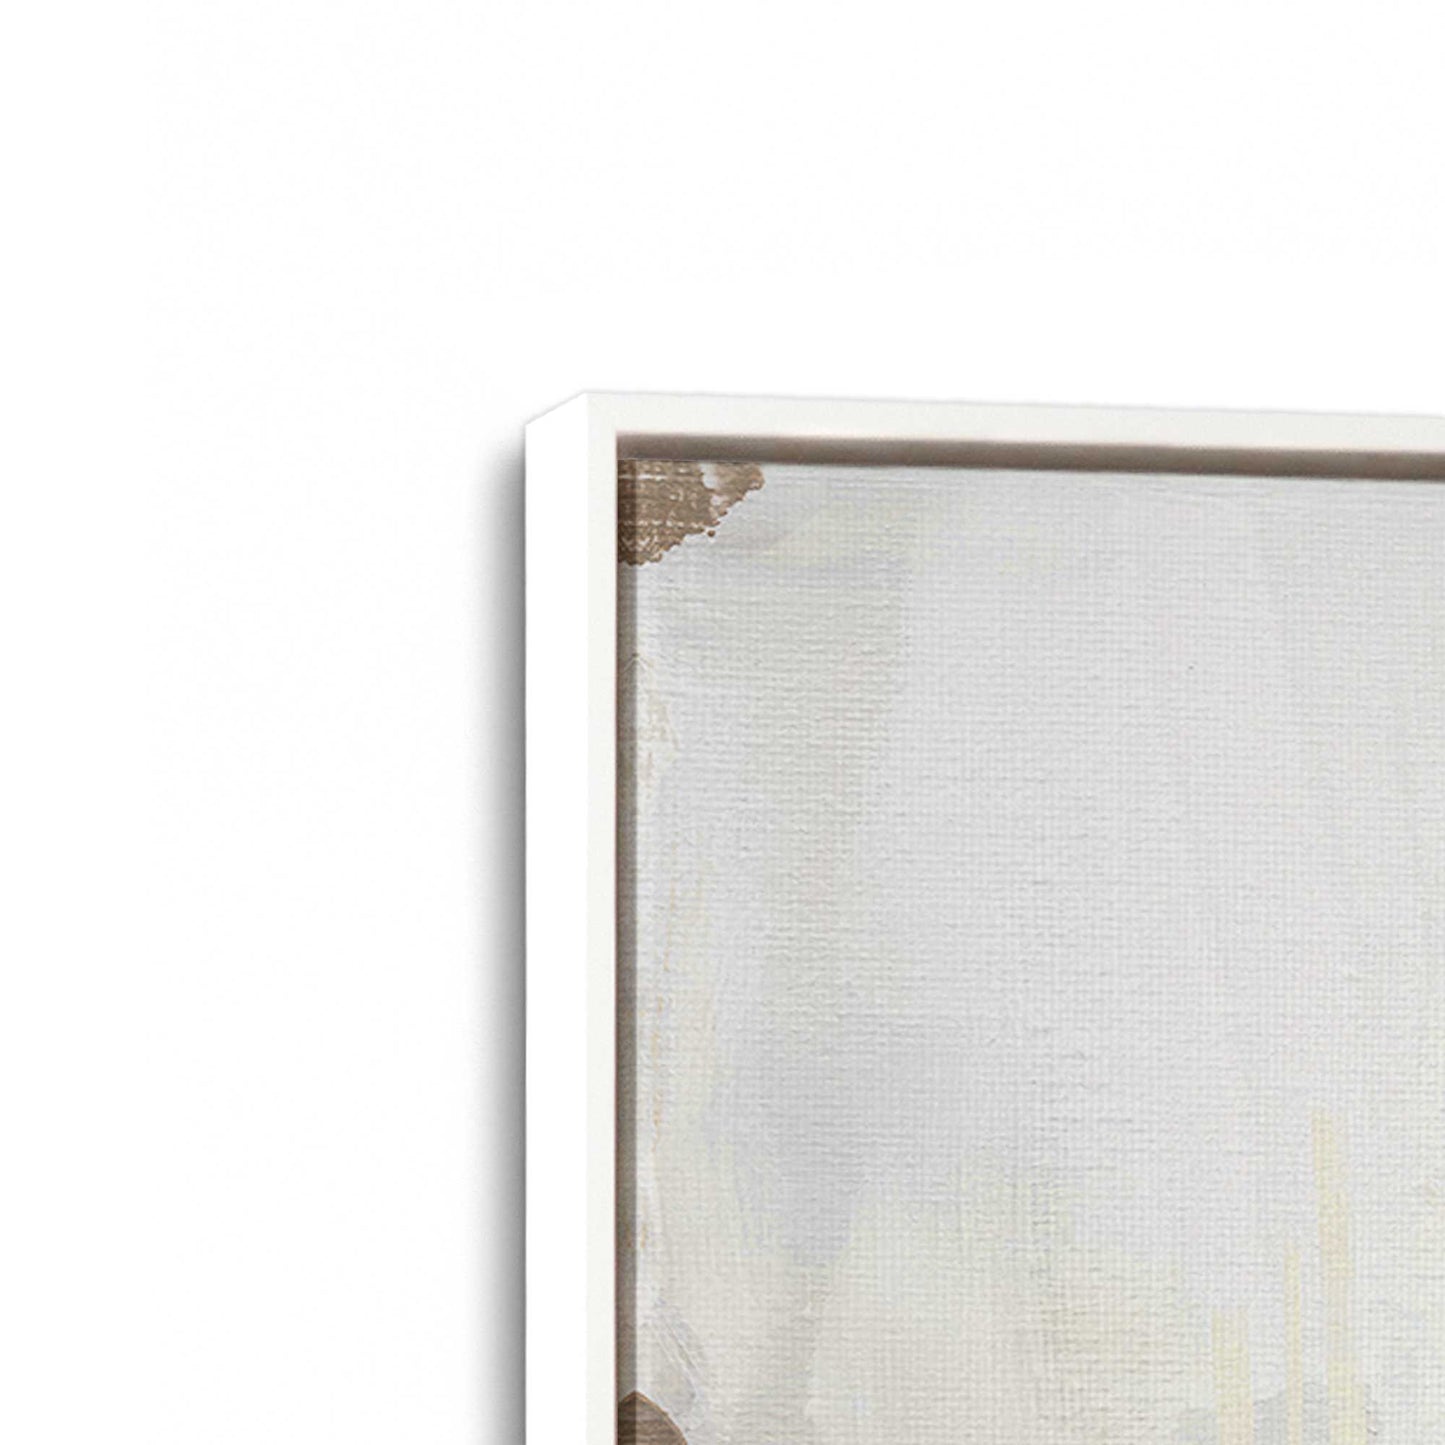 [Color:Opaque White] Picture of the corner #2 of the art